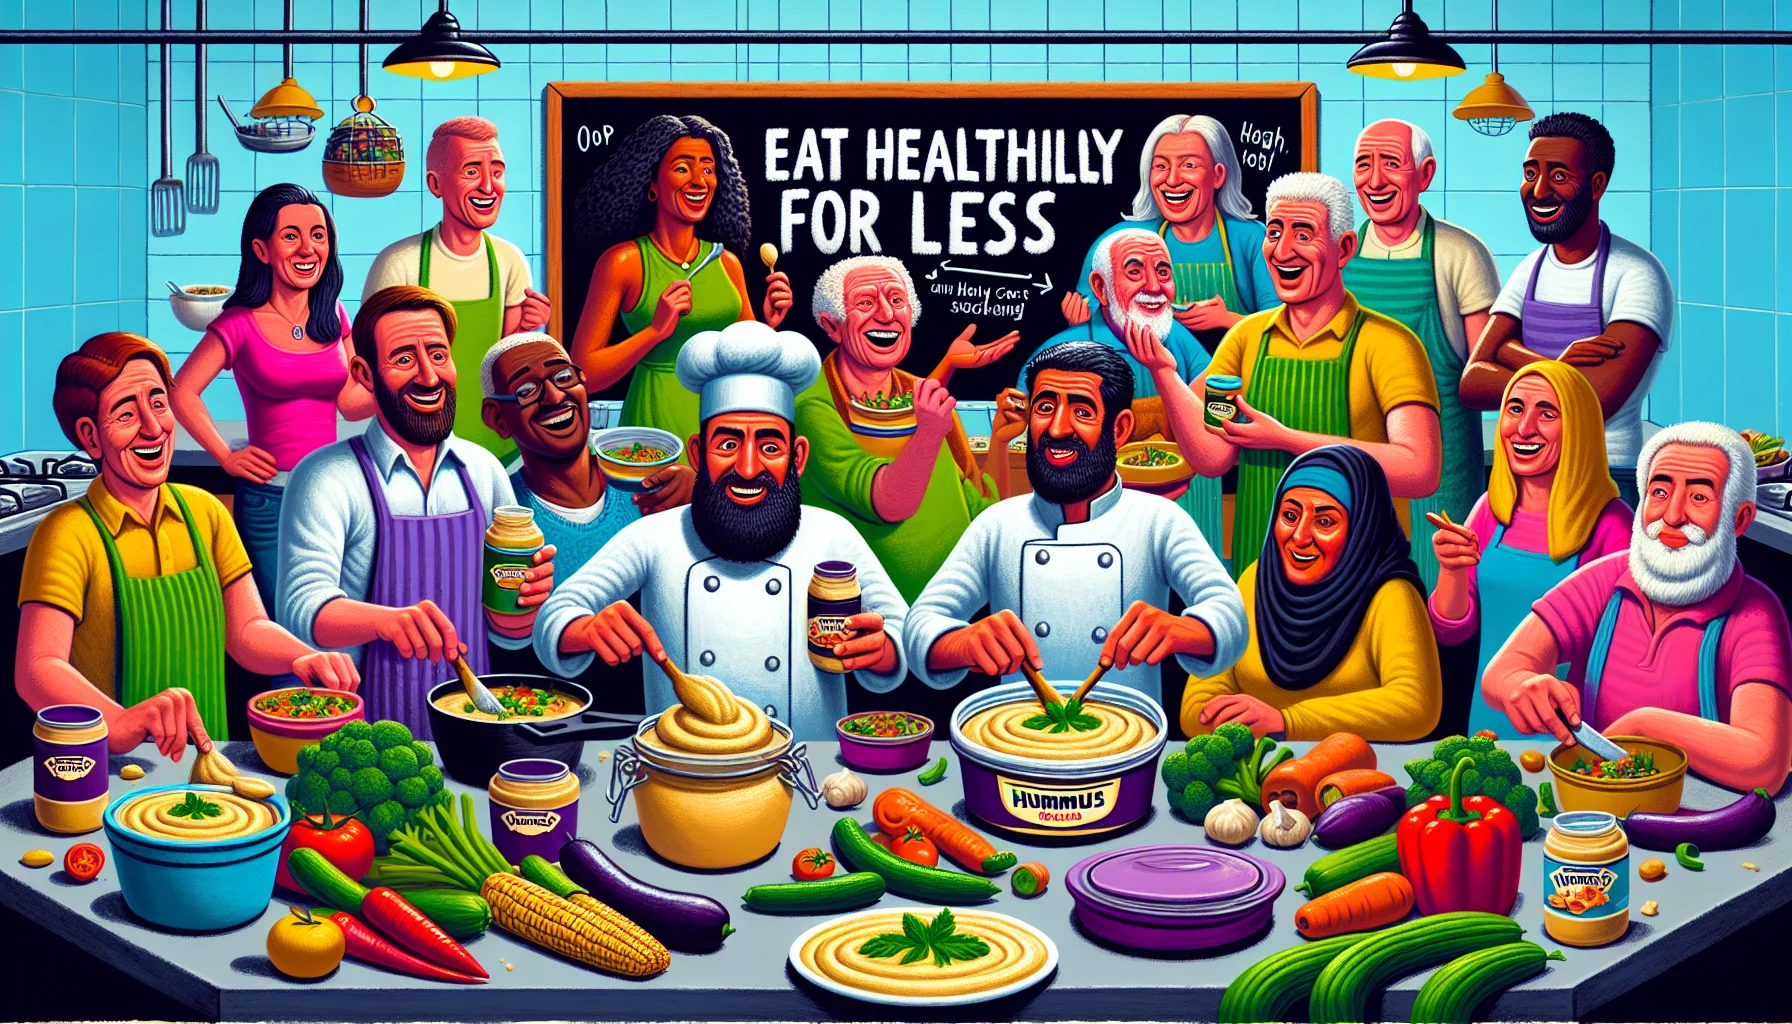 An entertaining scene, filled with vibrant colors and humor, shows a kitchen where hummus is used for creating low cost yet highly nutritious meals. A diverse mix of men and women with different descents such as Caucasian, Black, South Asian, and Hispanic are shown. Some are cooking, while others are discussing recipes featuring hummus as a main ingredient. Their faces light up with laughter as they turn ordinary vegetables into creative culinary artistry with hummus as staple ingredient. On a chalkboard in the background is written the slogan: 'Eat Healthily for Less'.